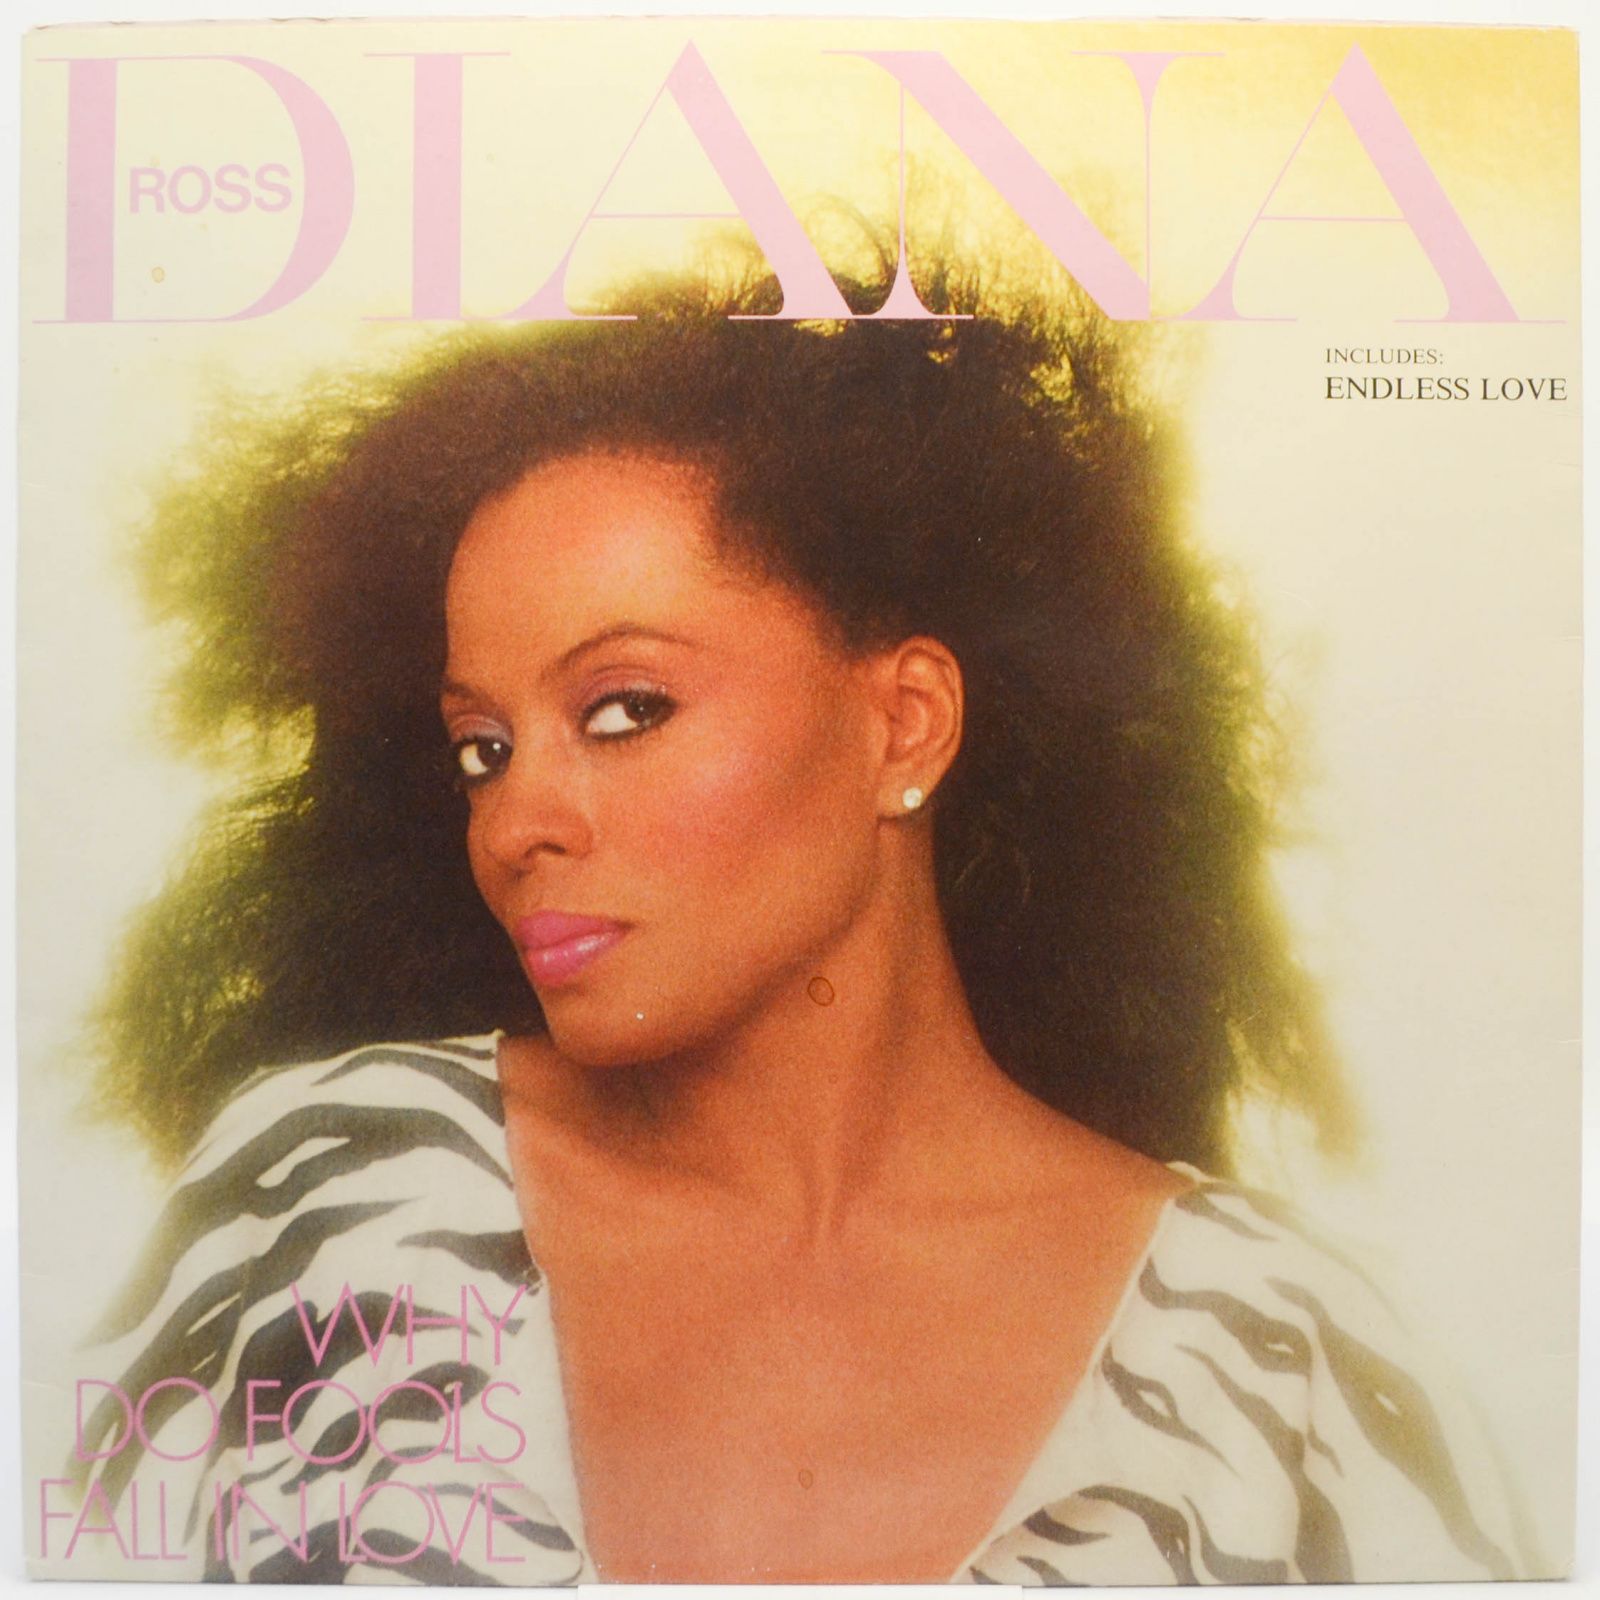 Diana Ross — Why Do Fools Fall In Love, 1981